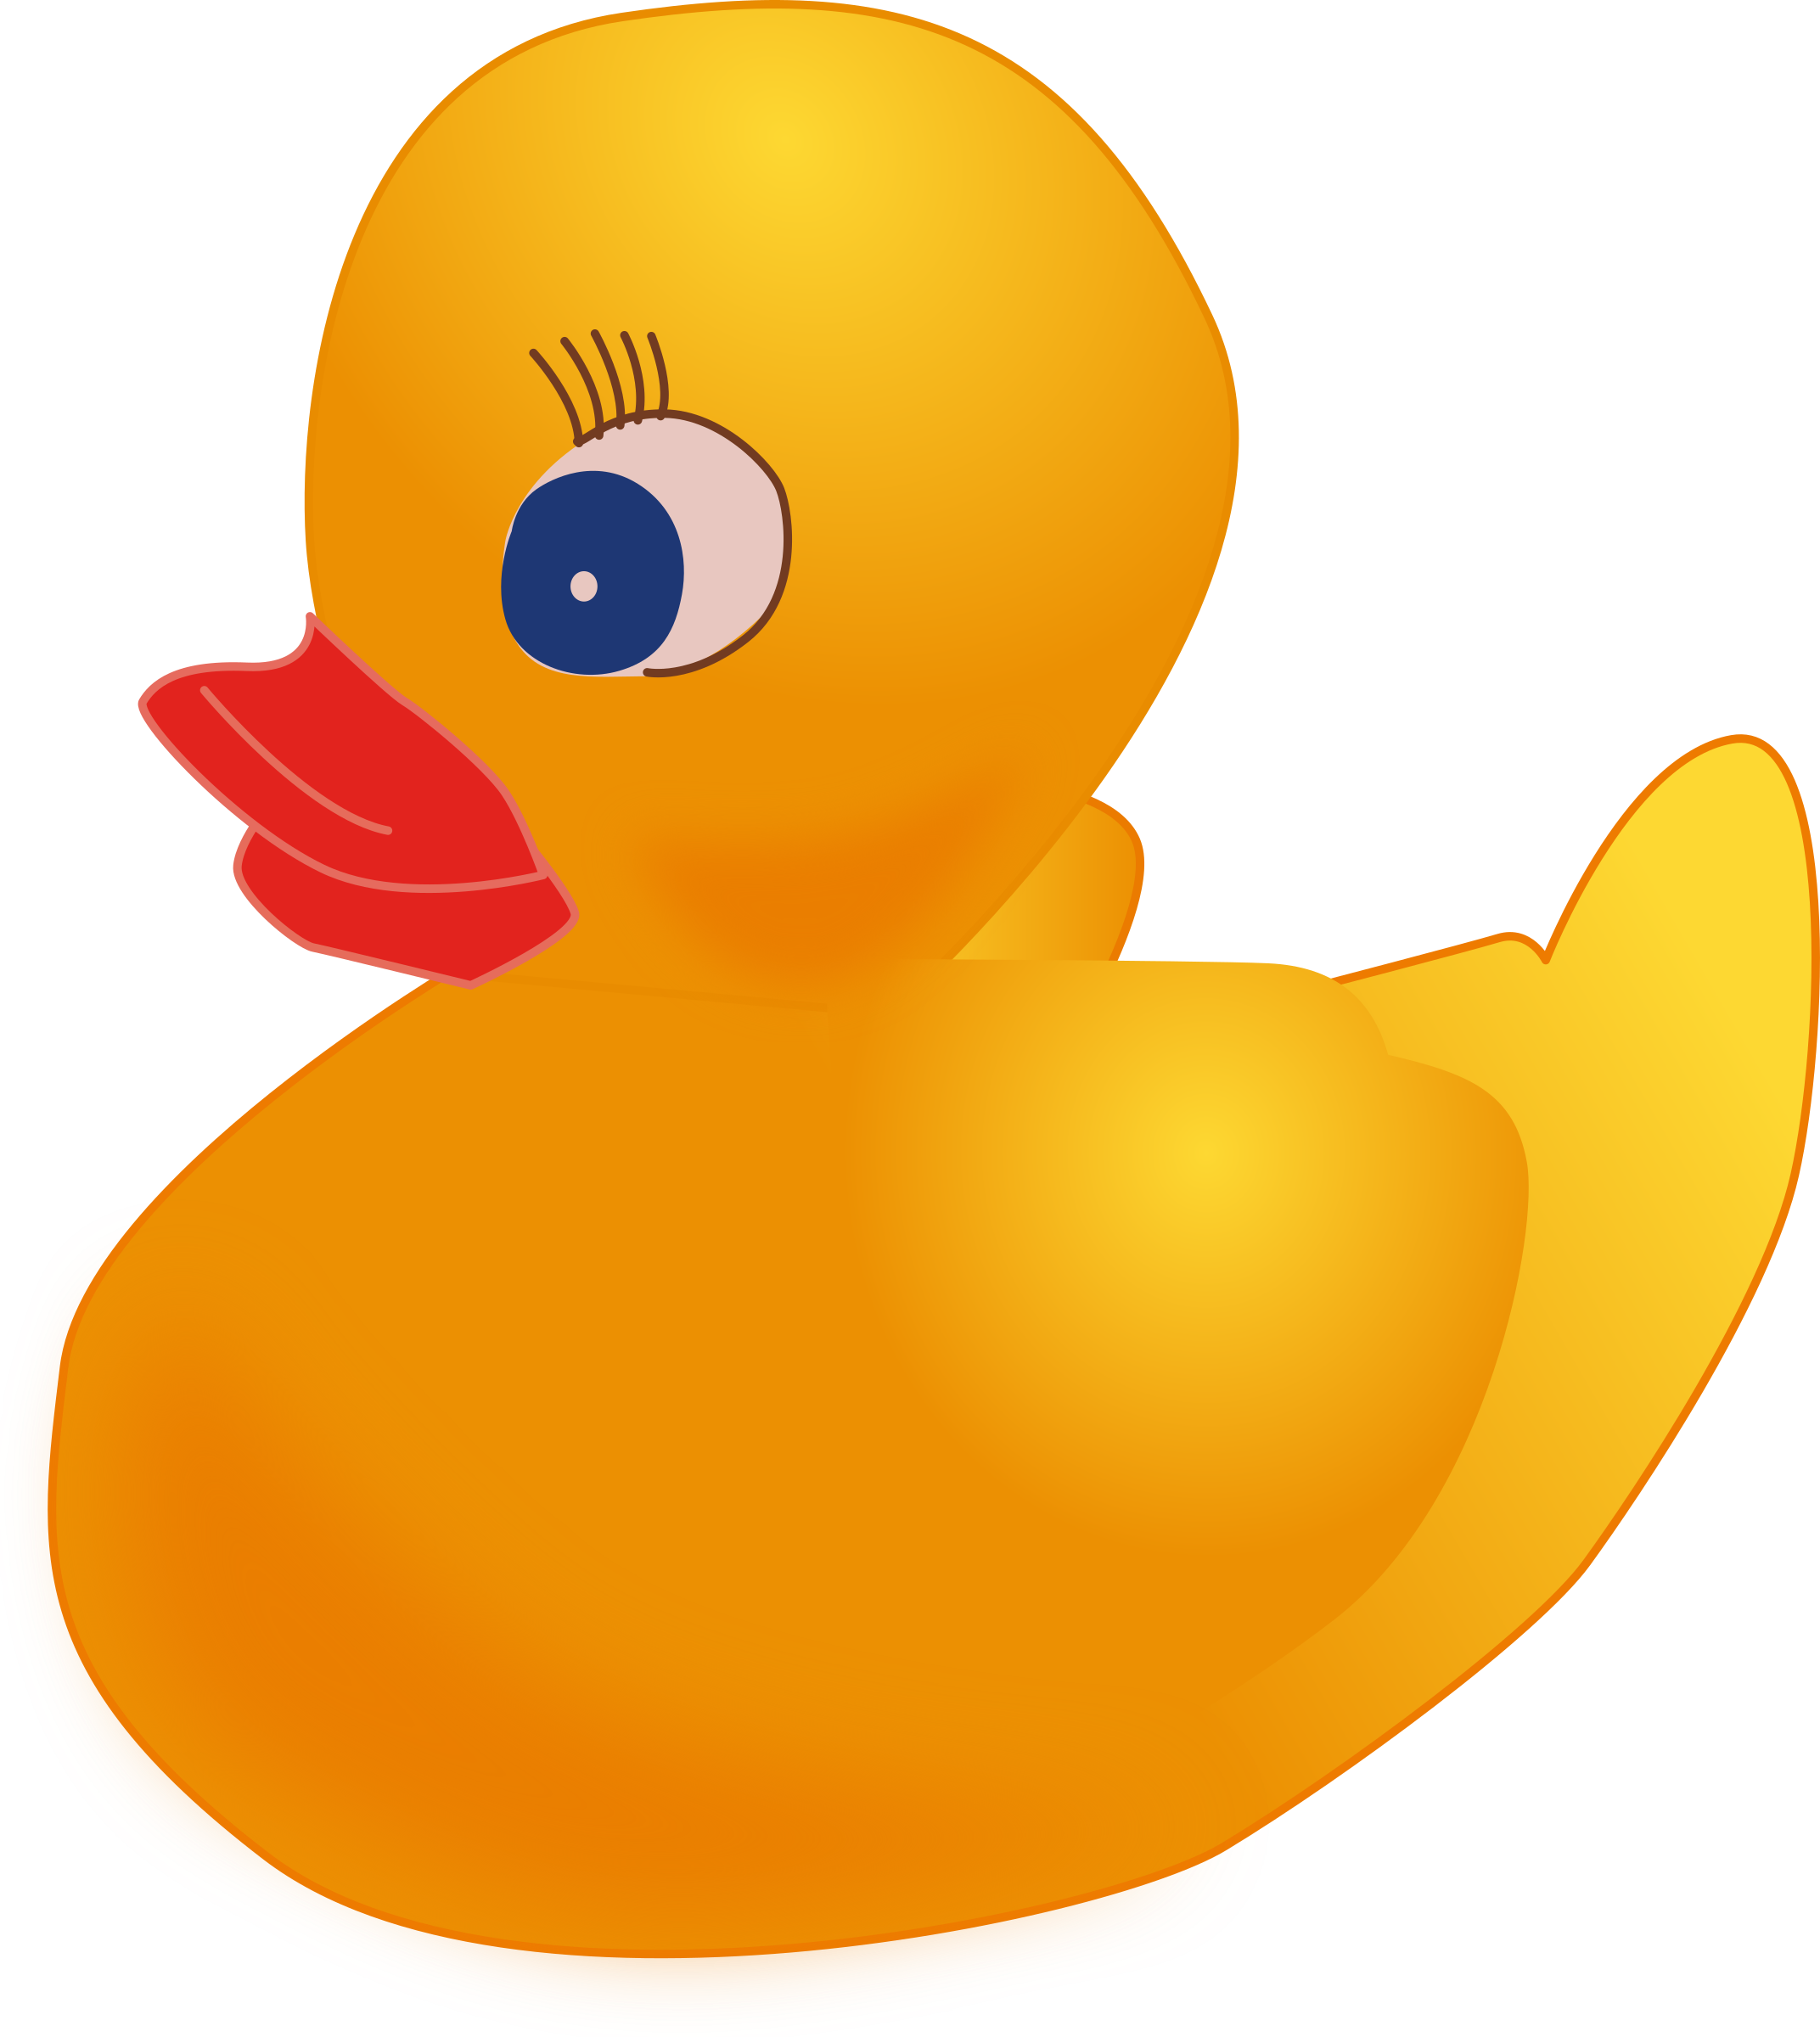 Female Rubber Ducky Vector Clipart image